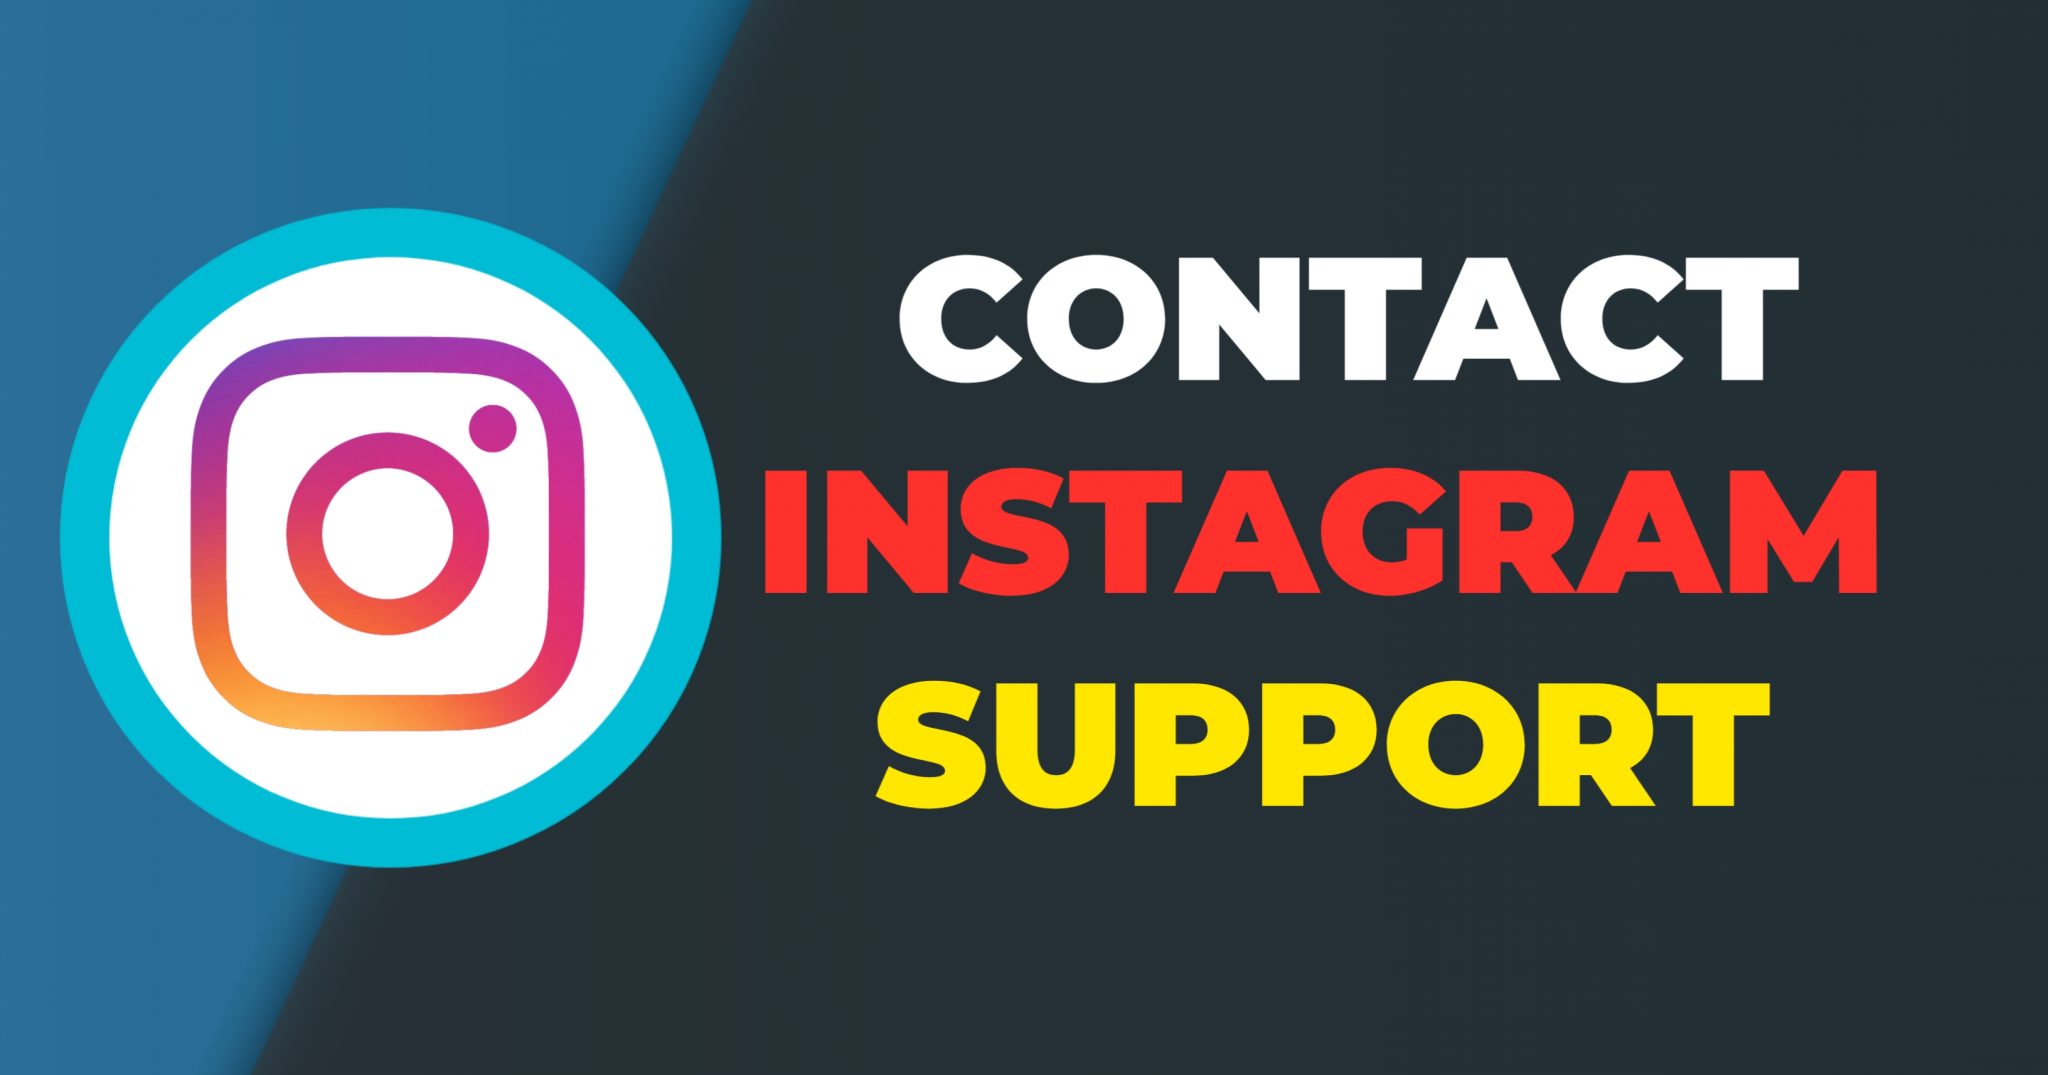  A blue and black background with the Instagram logo on the left and 'Contact Instagram Support' text on the right.